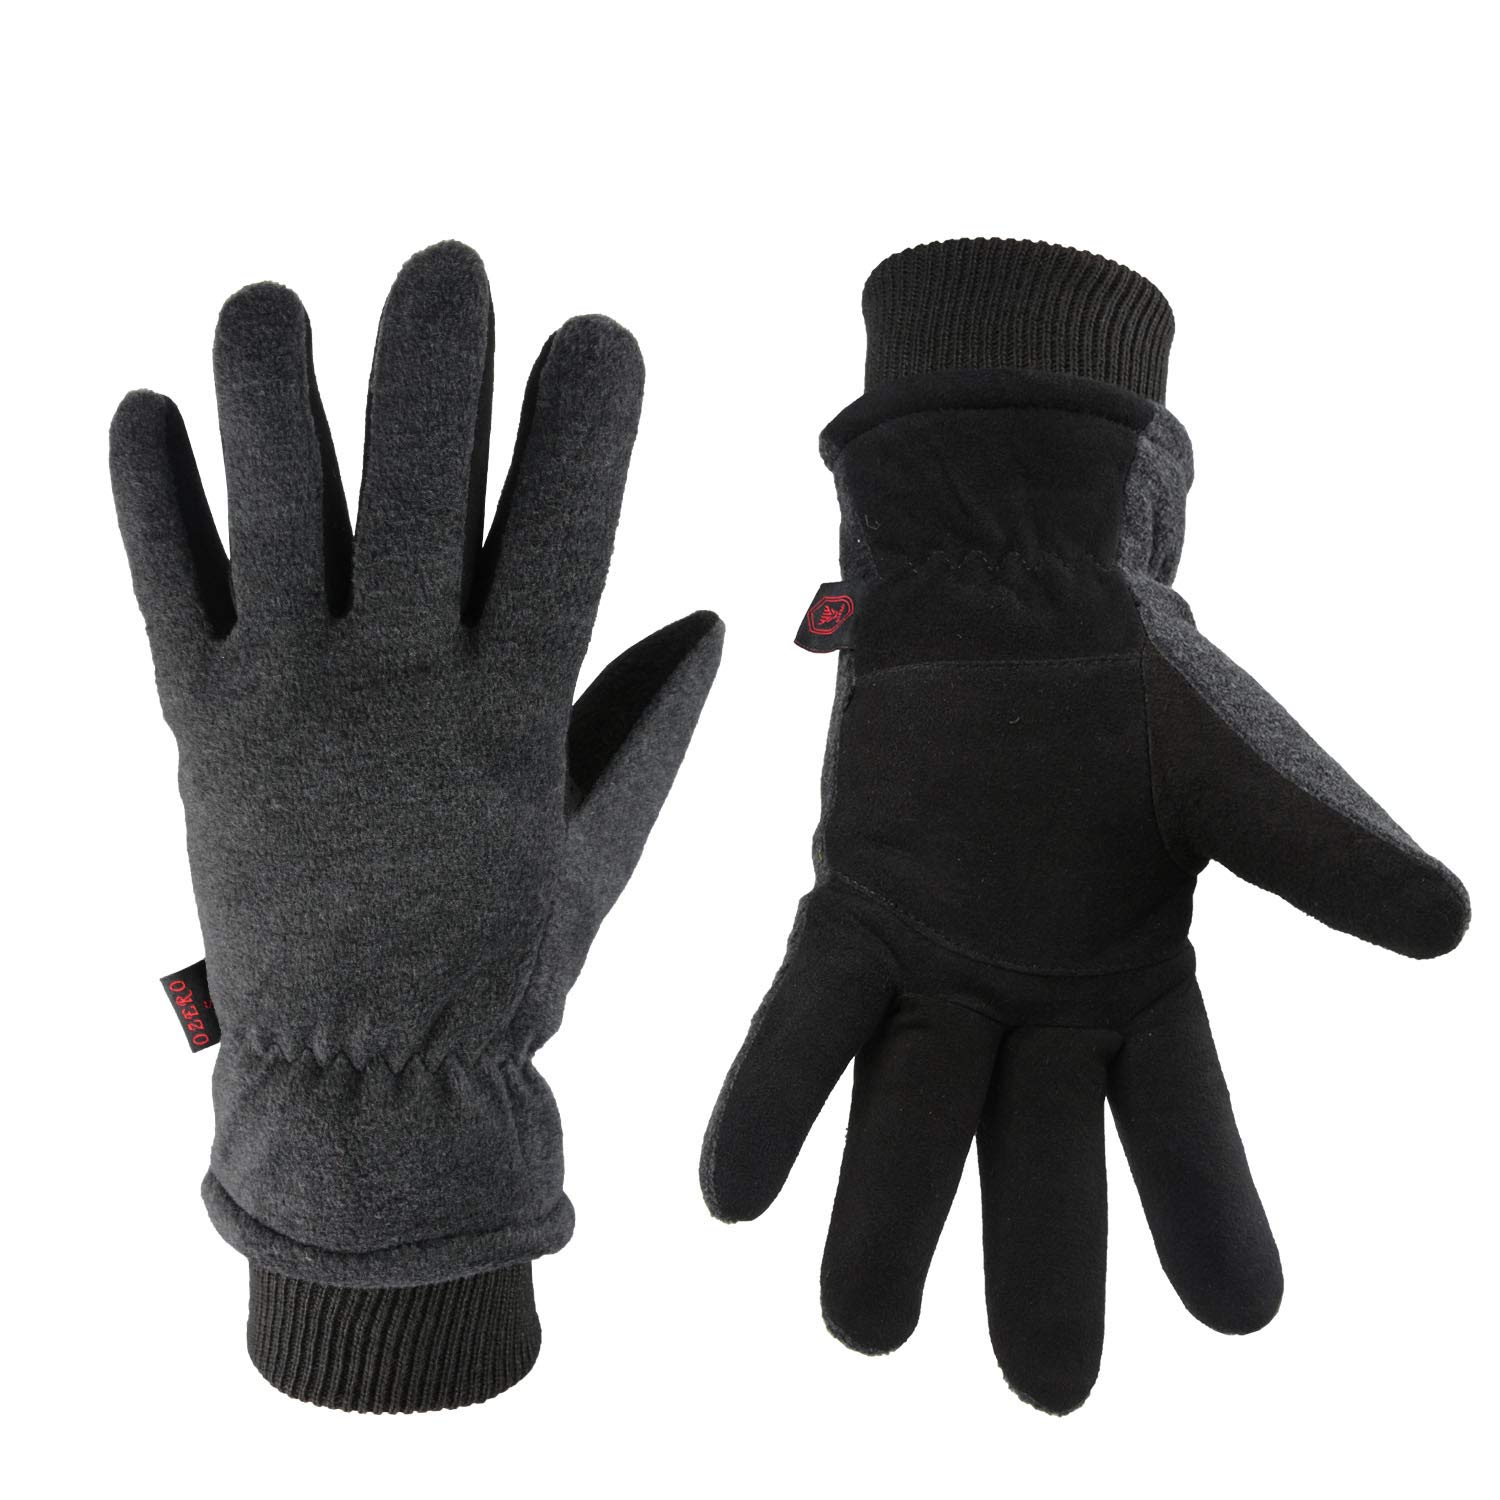 OZERO Winter Gloves -30°F Cold Proof Deerskin Suede Leather Insulated Water-Resistant Windproof Thermal Glove for Driving Hiking Snow Work in Cold Weather - Warm Gifts for Men and Women